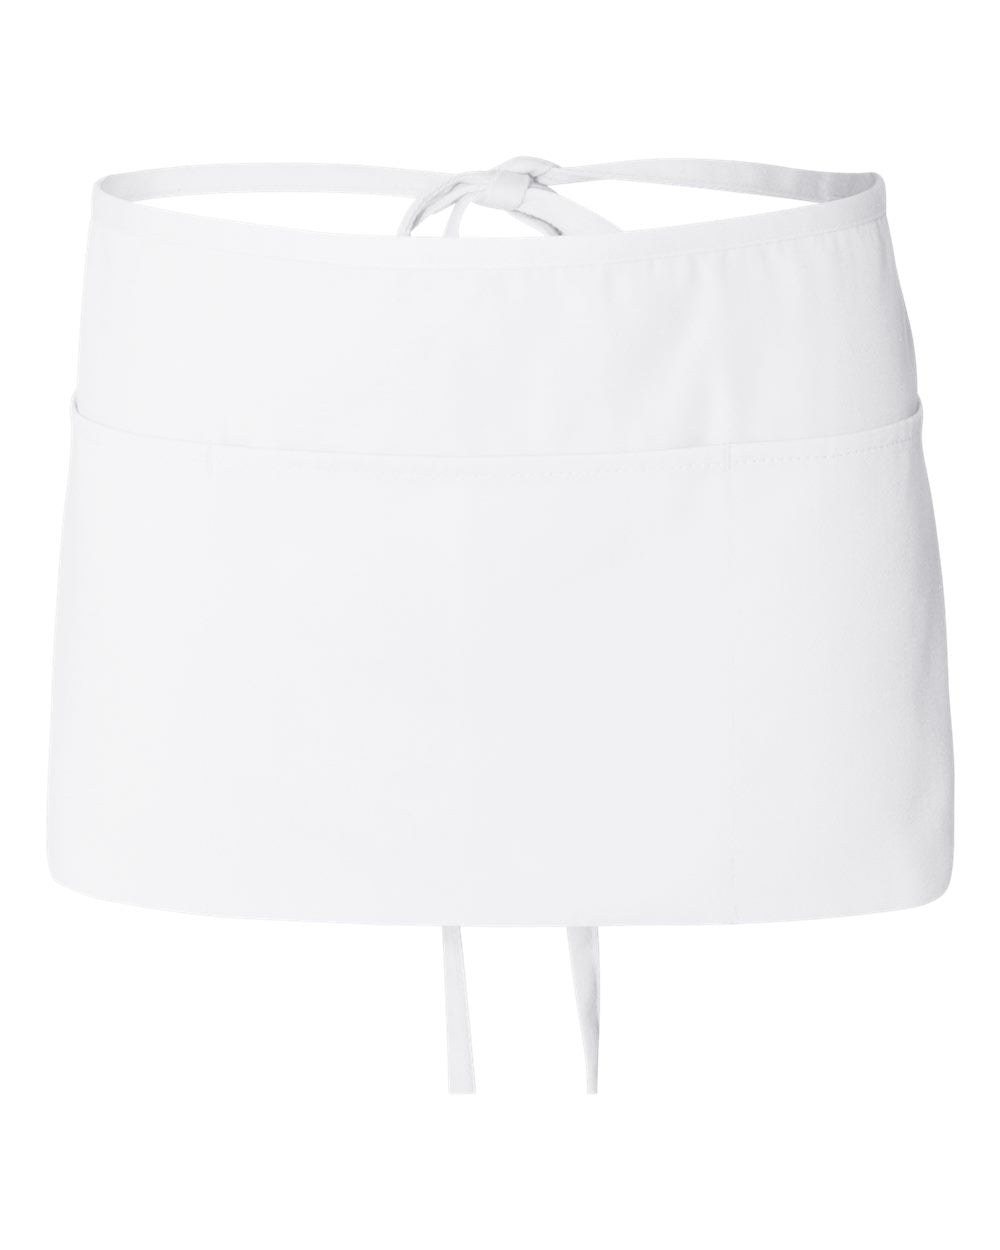 Q-Tees Waist Apron with Pockets Q2115 #color_White